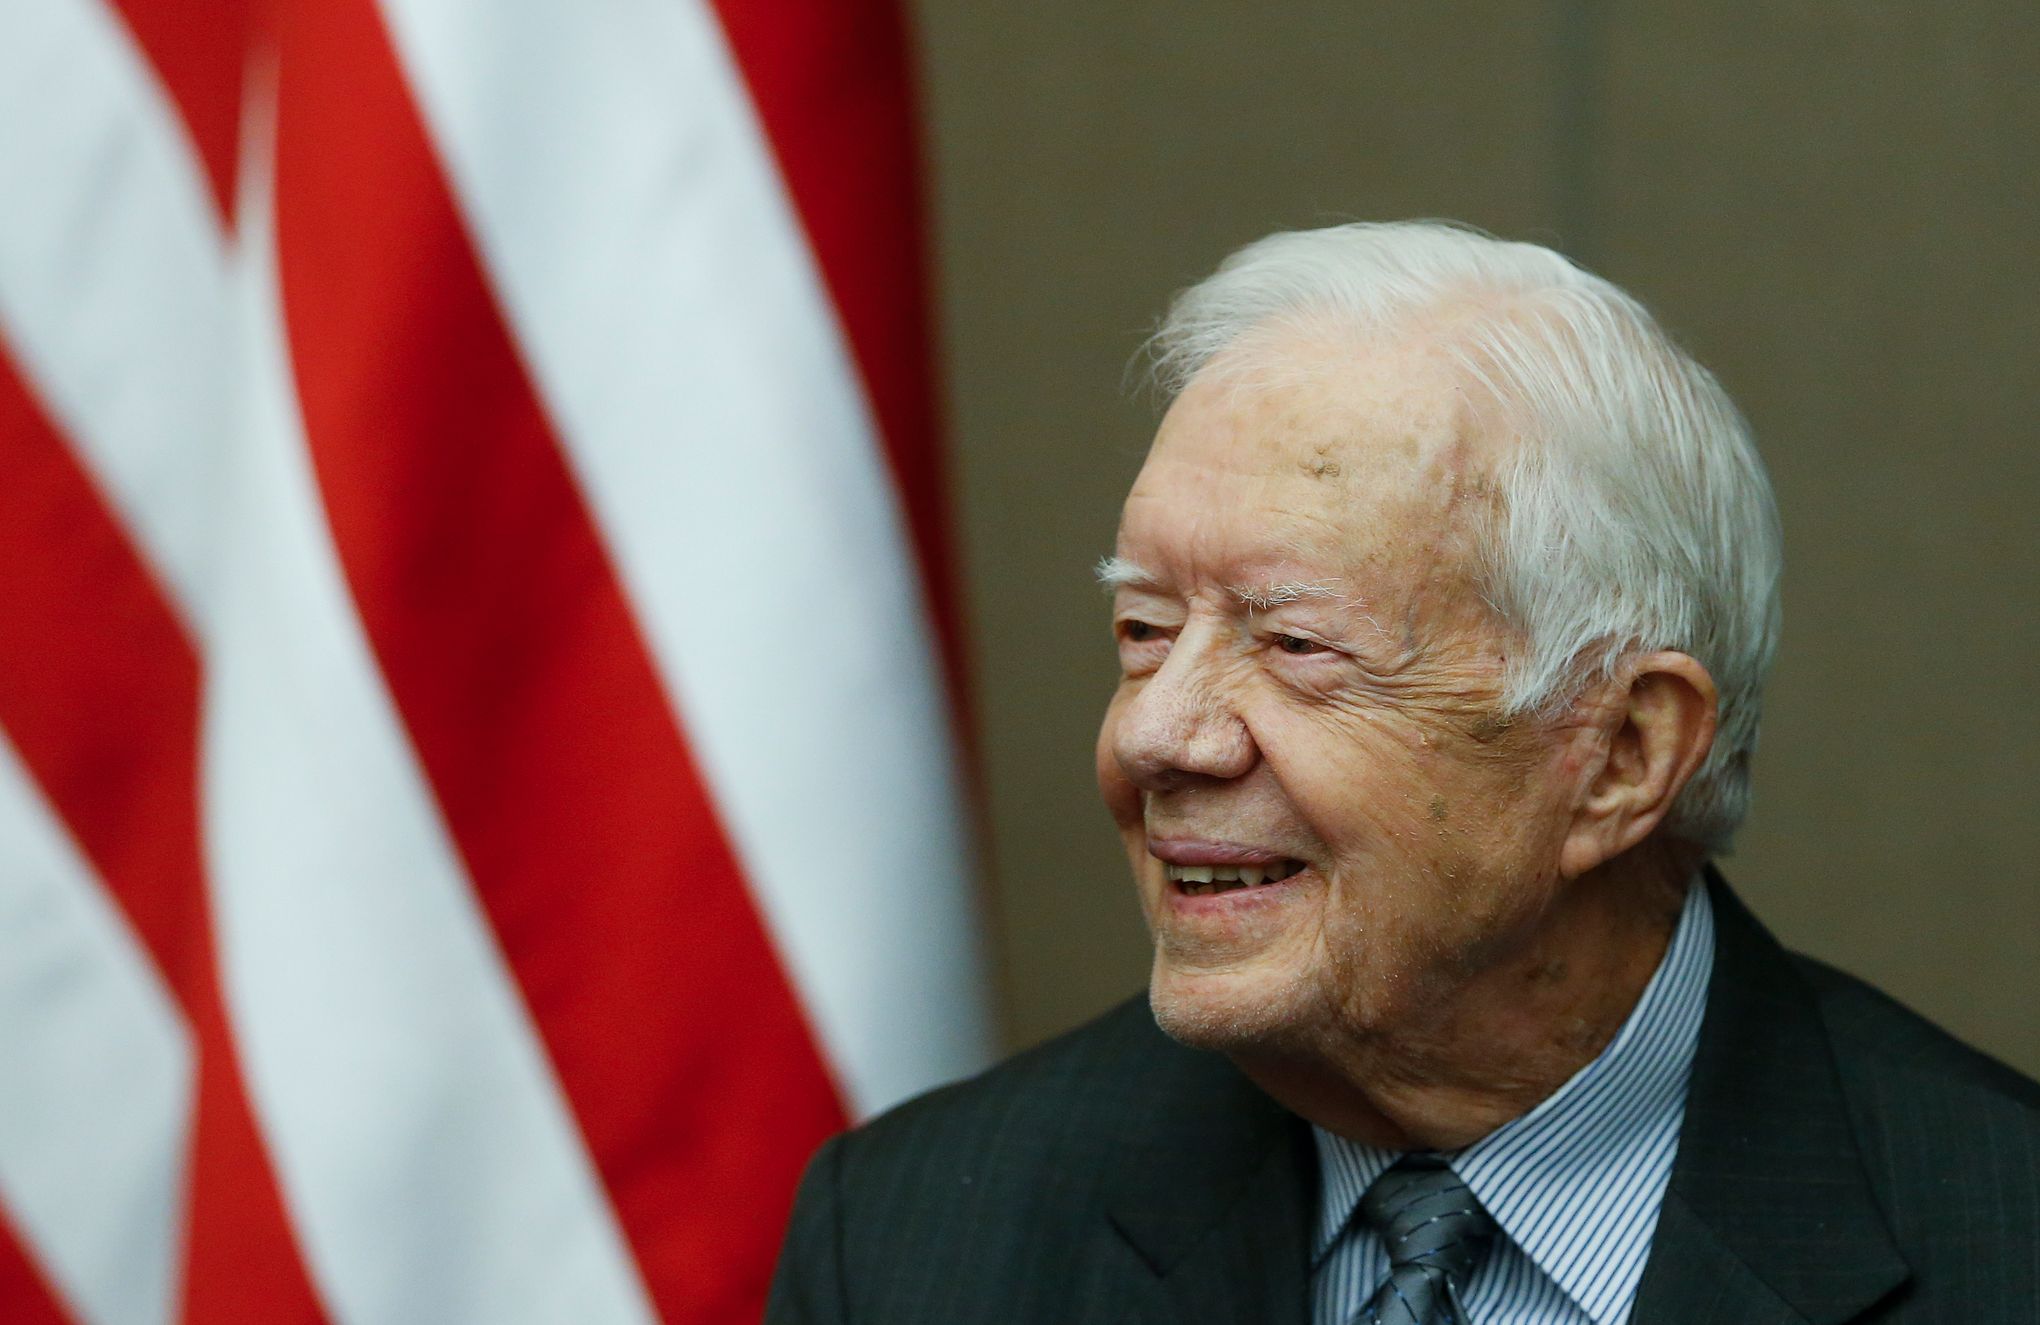 Former President Jimmy Carter, 98, to Receive Hospice Care